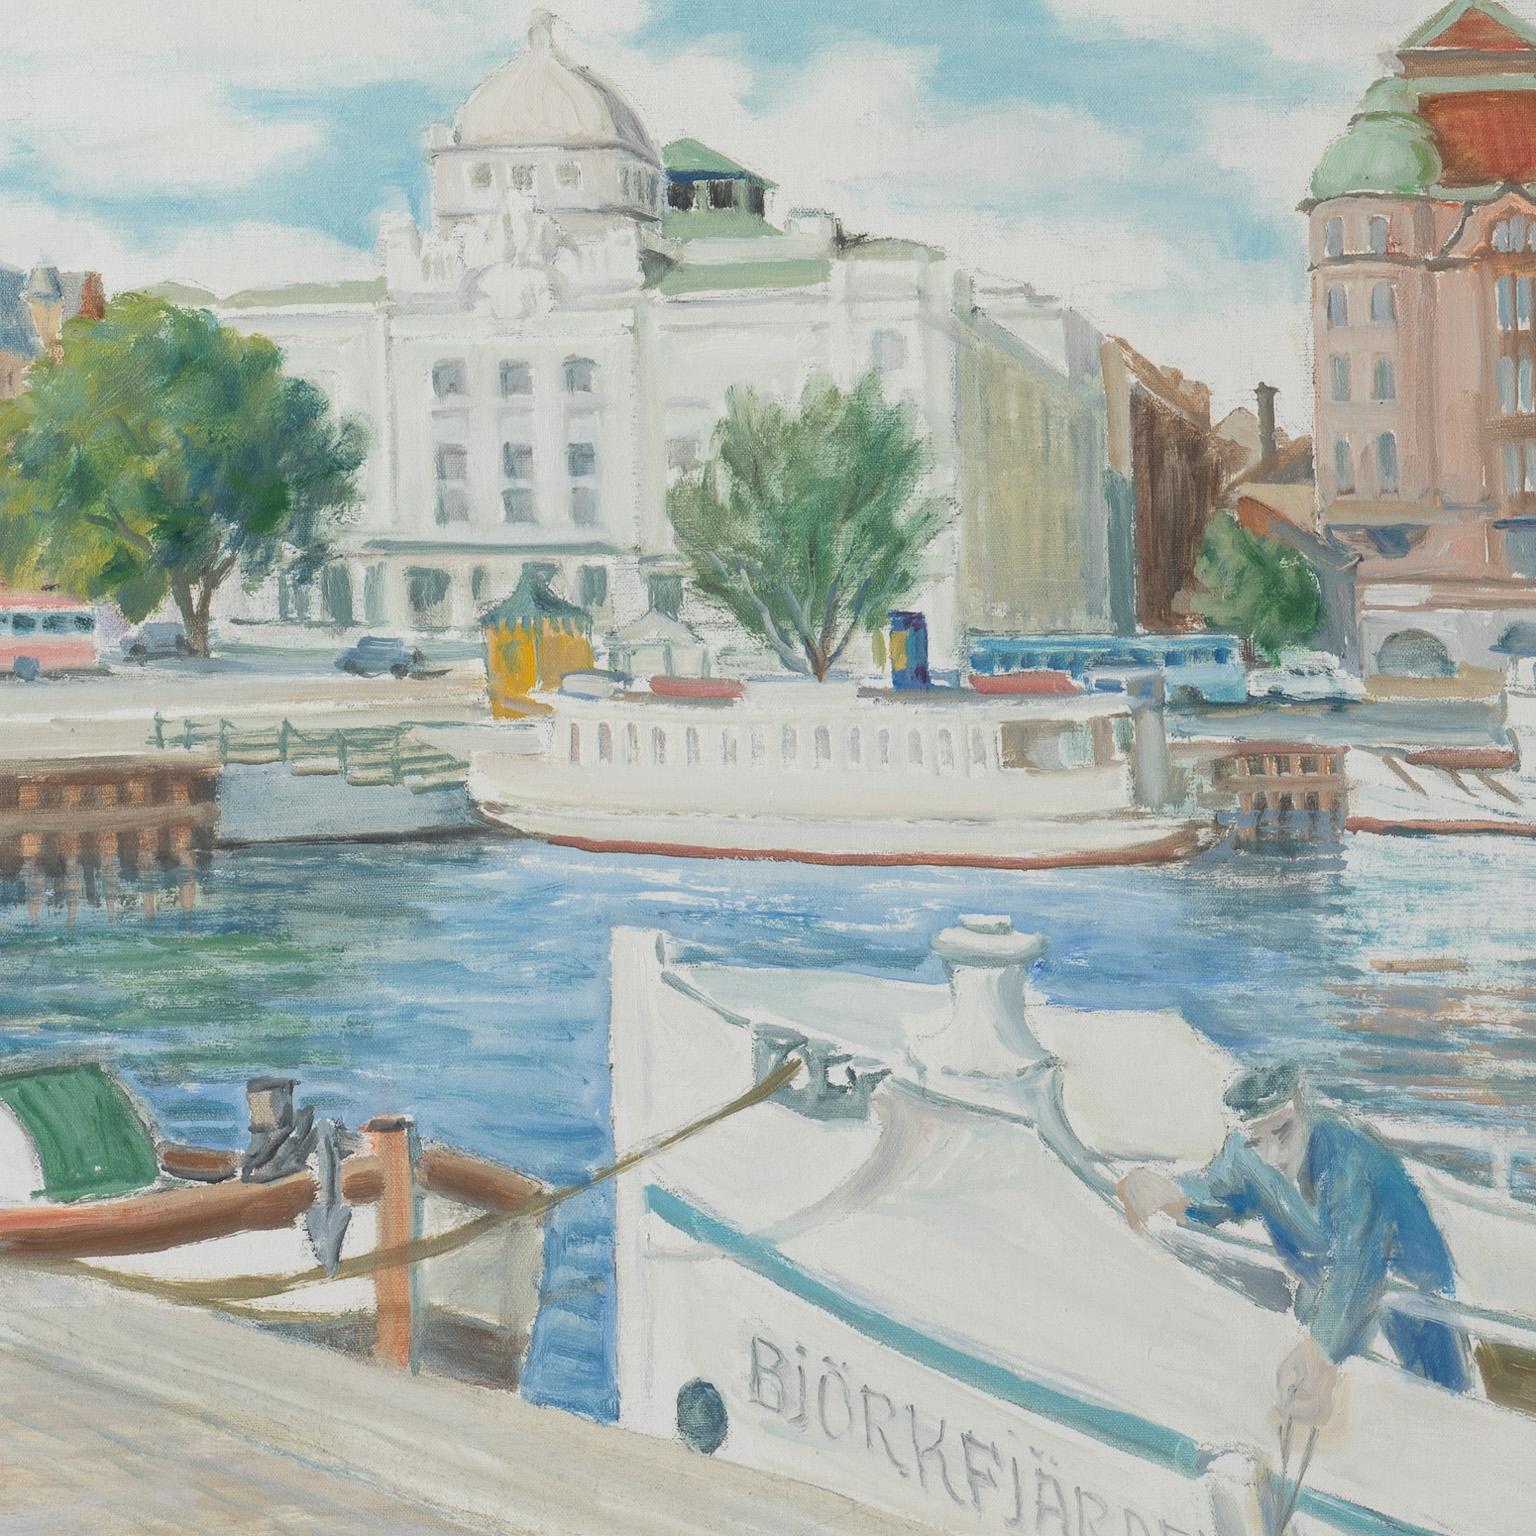 This charming painting depicts the cove at Nybroviken and the bridge that connects two areas of Stockholm. Eriksson has created a vivid scene that shows the activity going on in this busy part of the city. In the background is the Royal Dramatic